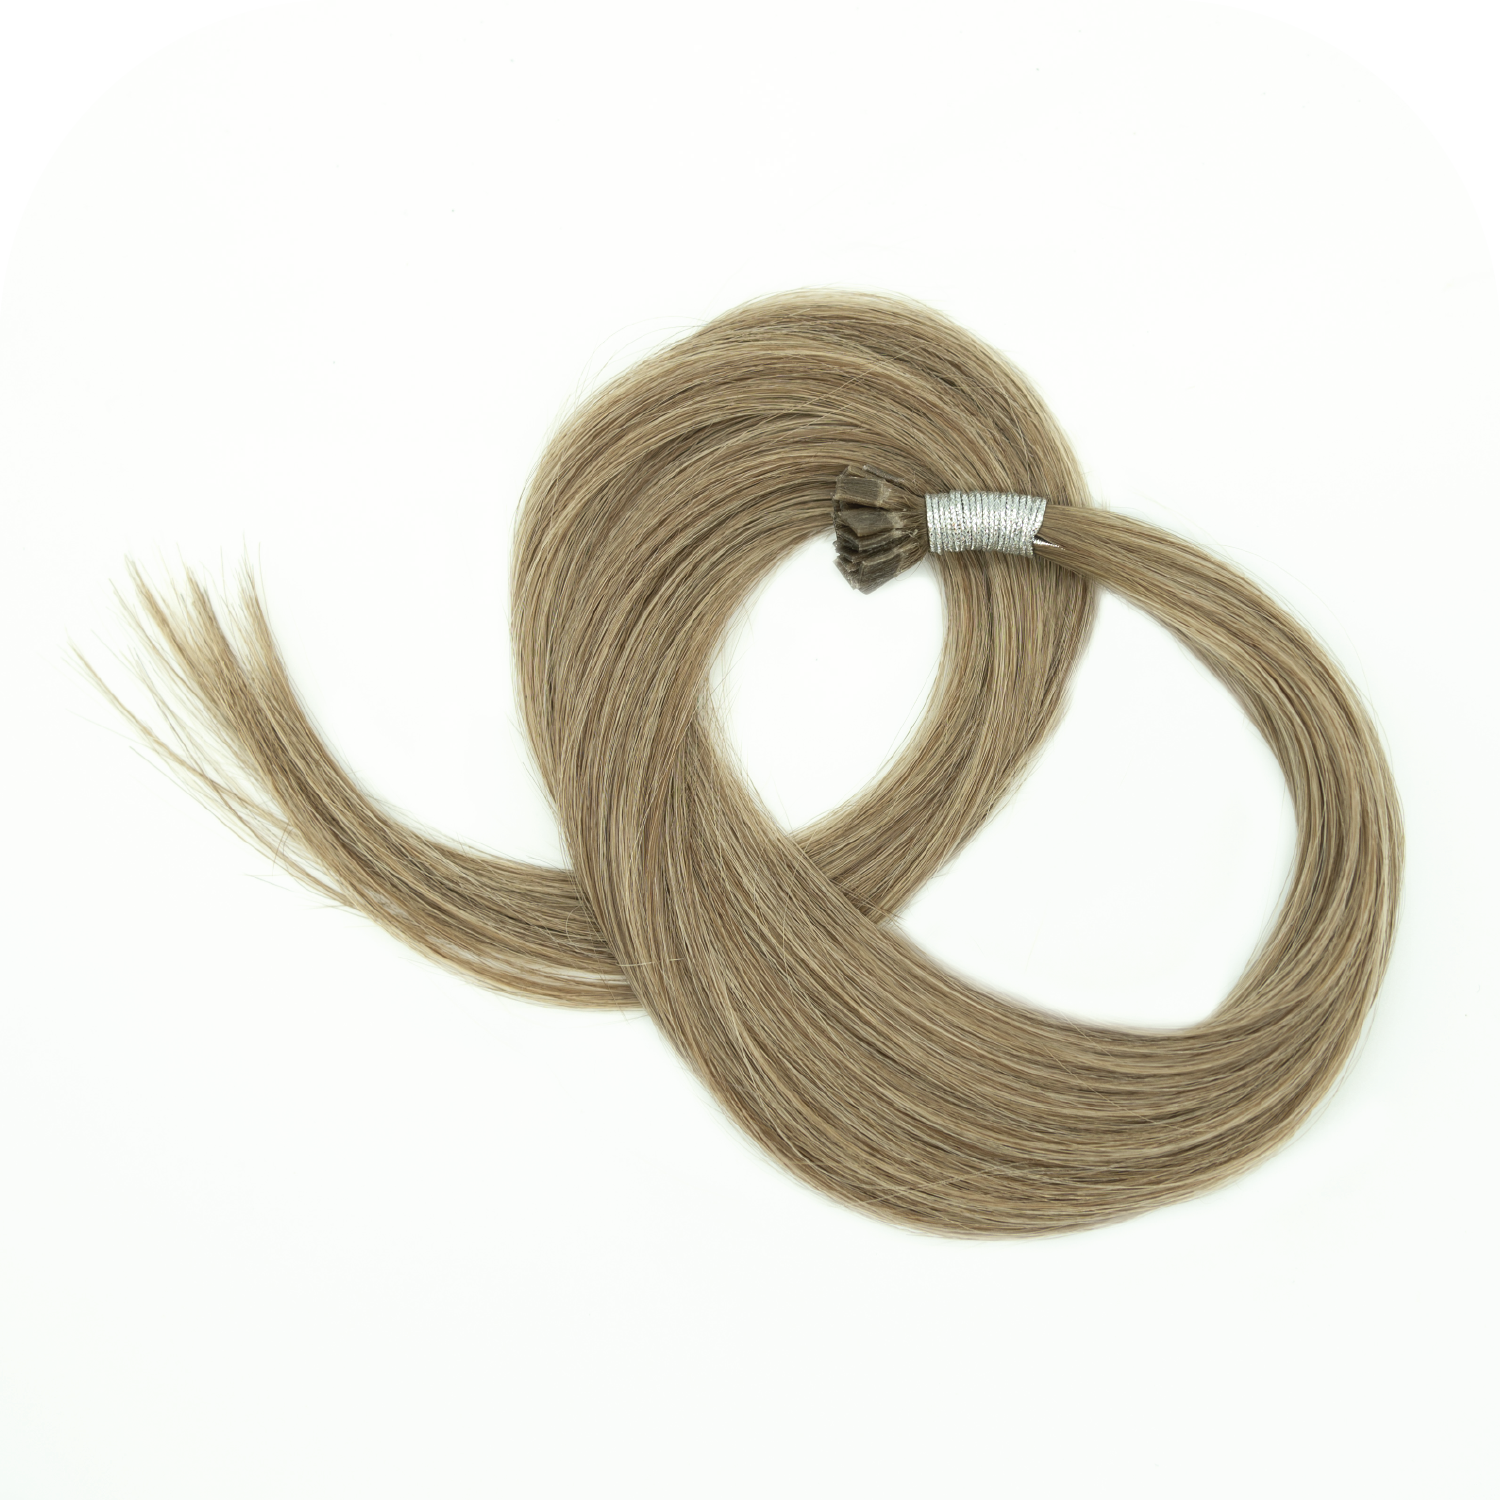 Couture Hair Co. Couture Tip or K Tip Extensions in Color Dark Blond Mix 